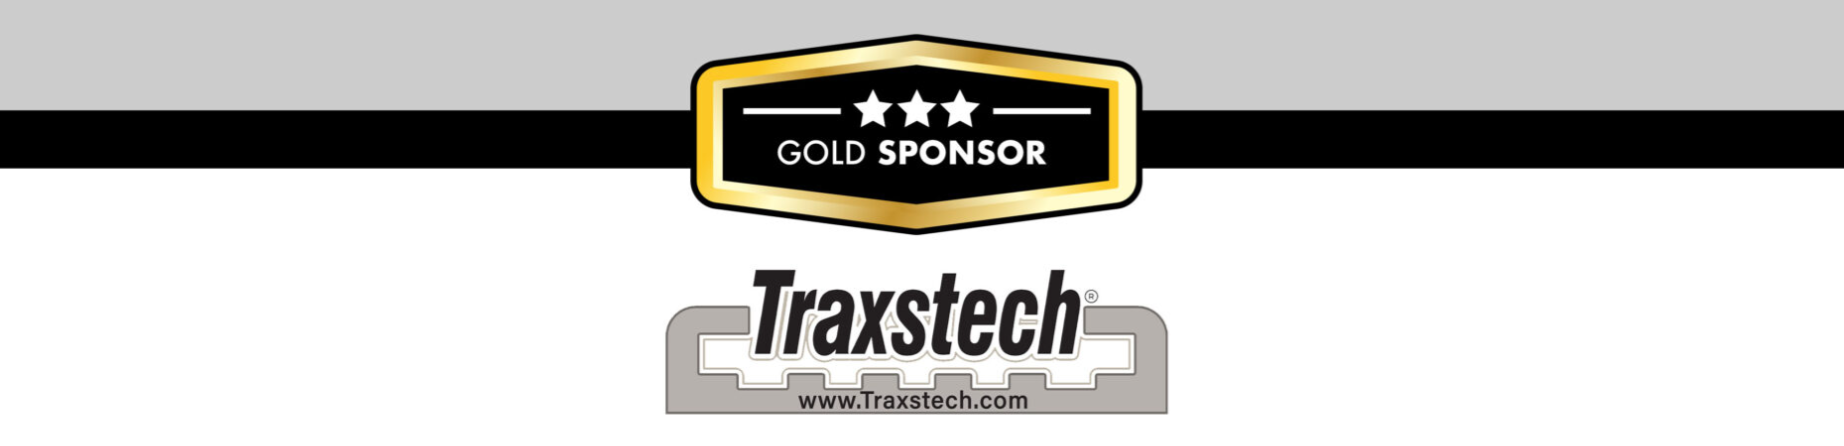 Traxstech Products - Traxstech Corporation